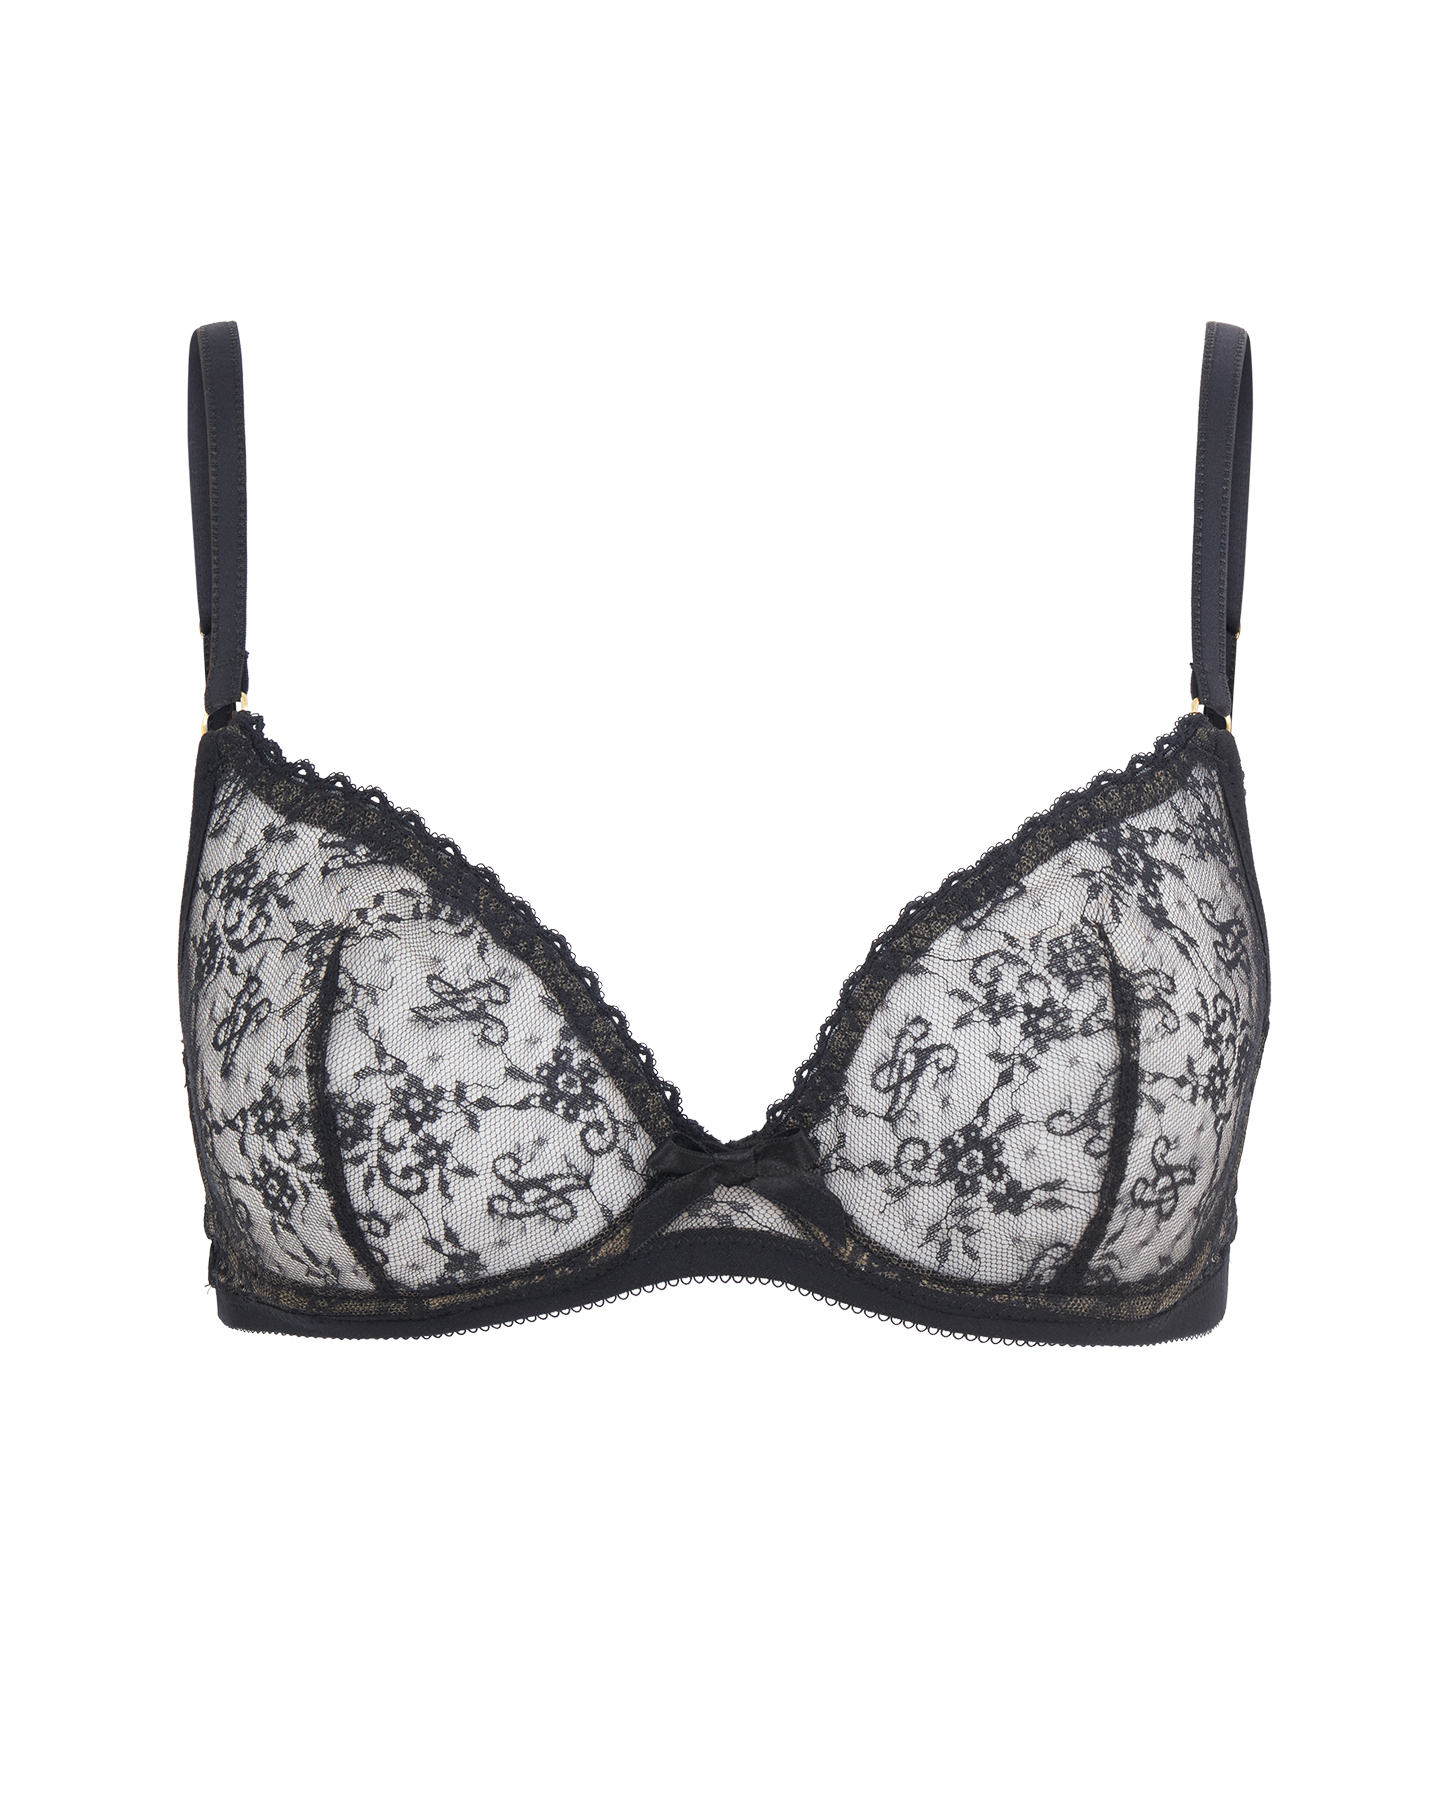 Agent Provocateur Unlined Mesh Lace Bra 34D White Underwire Sheer Bridal -  Helia Beer Co